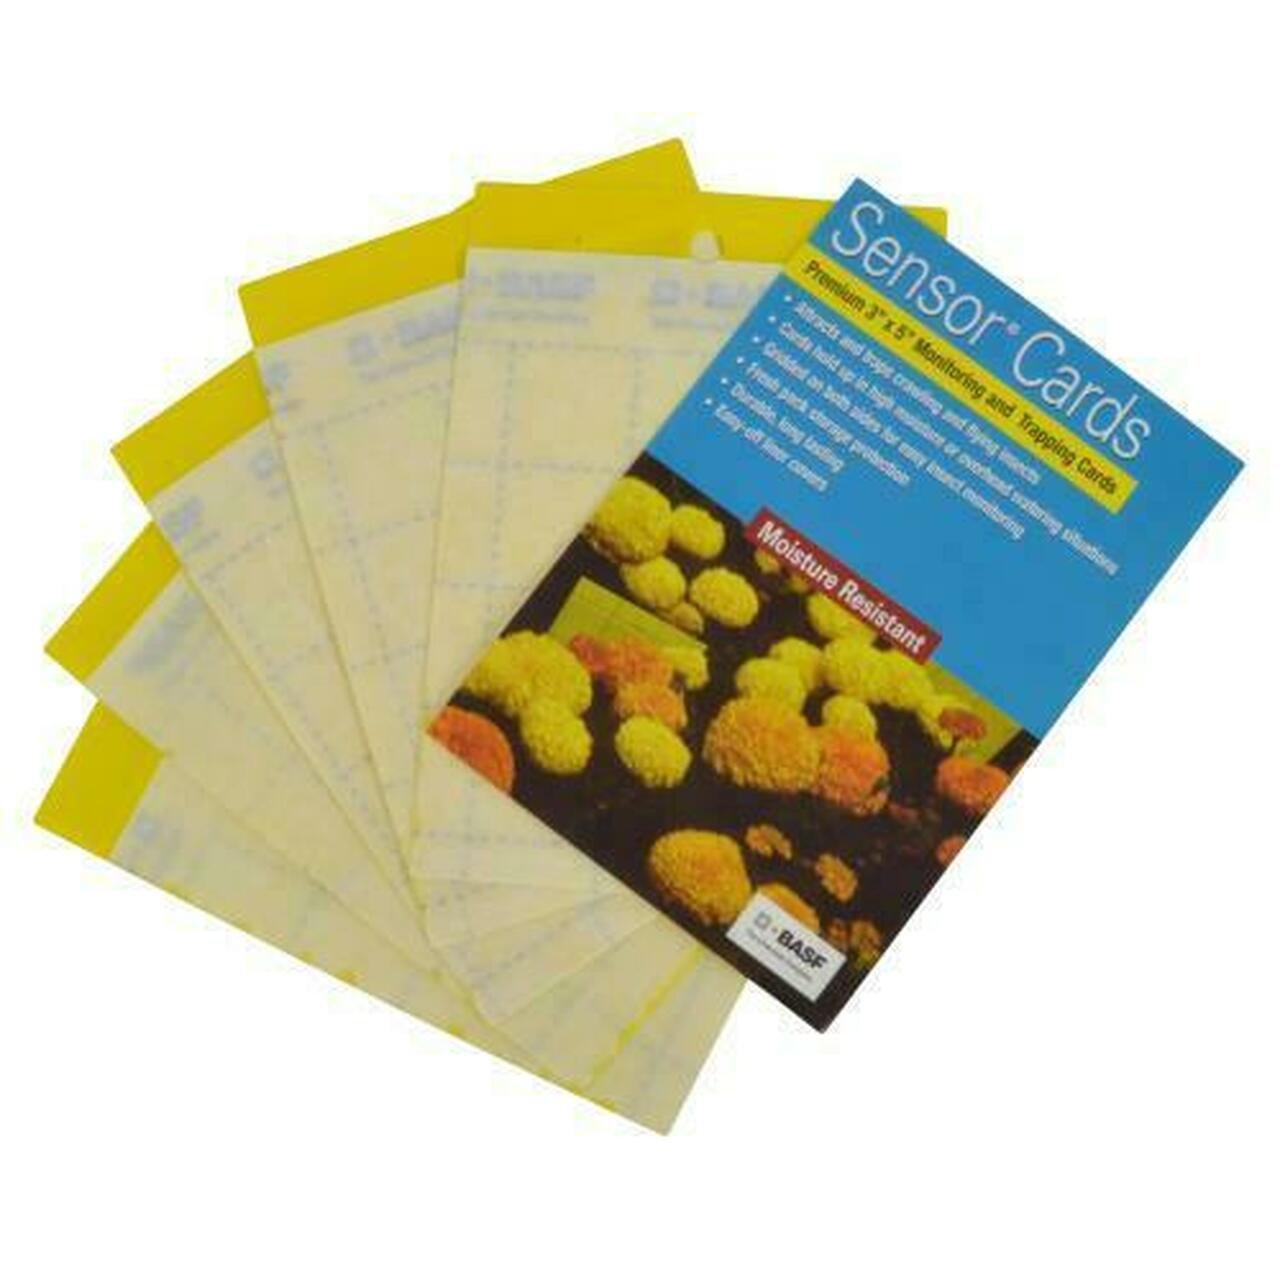 BASF - Yellow Pest Monitoring Cards - 3" x 5"